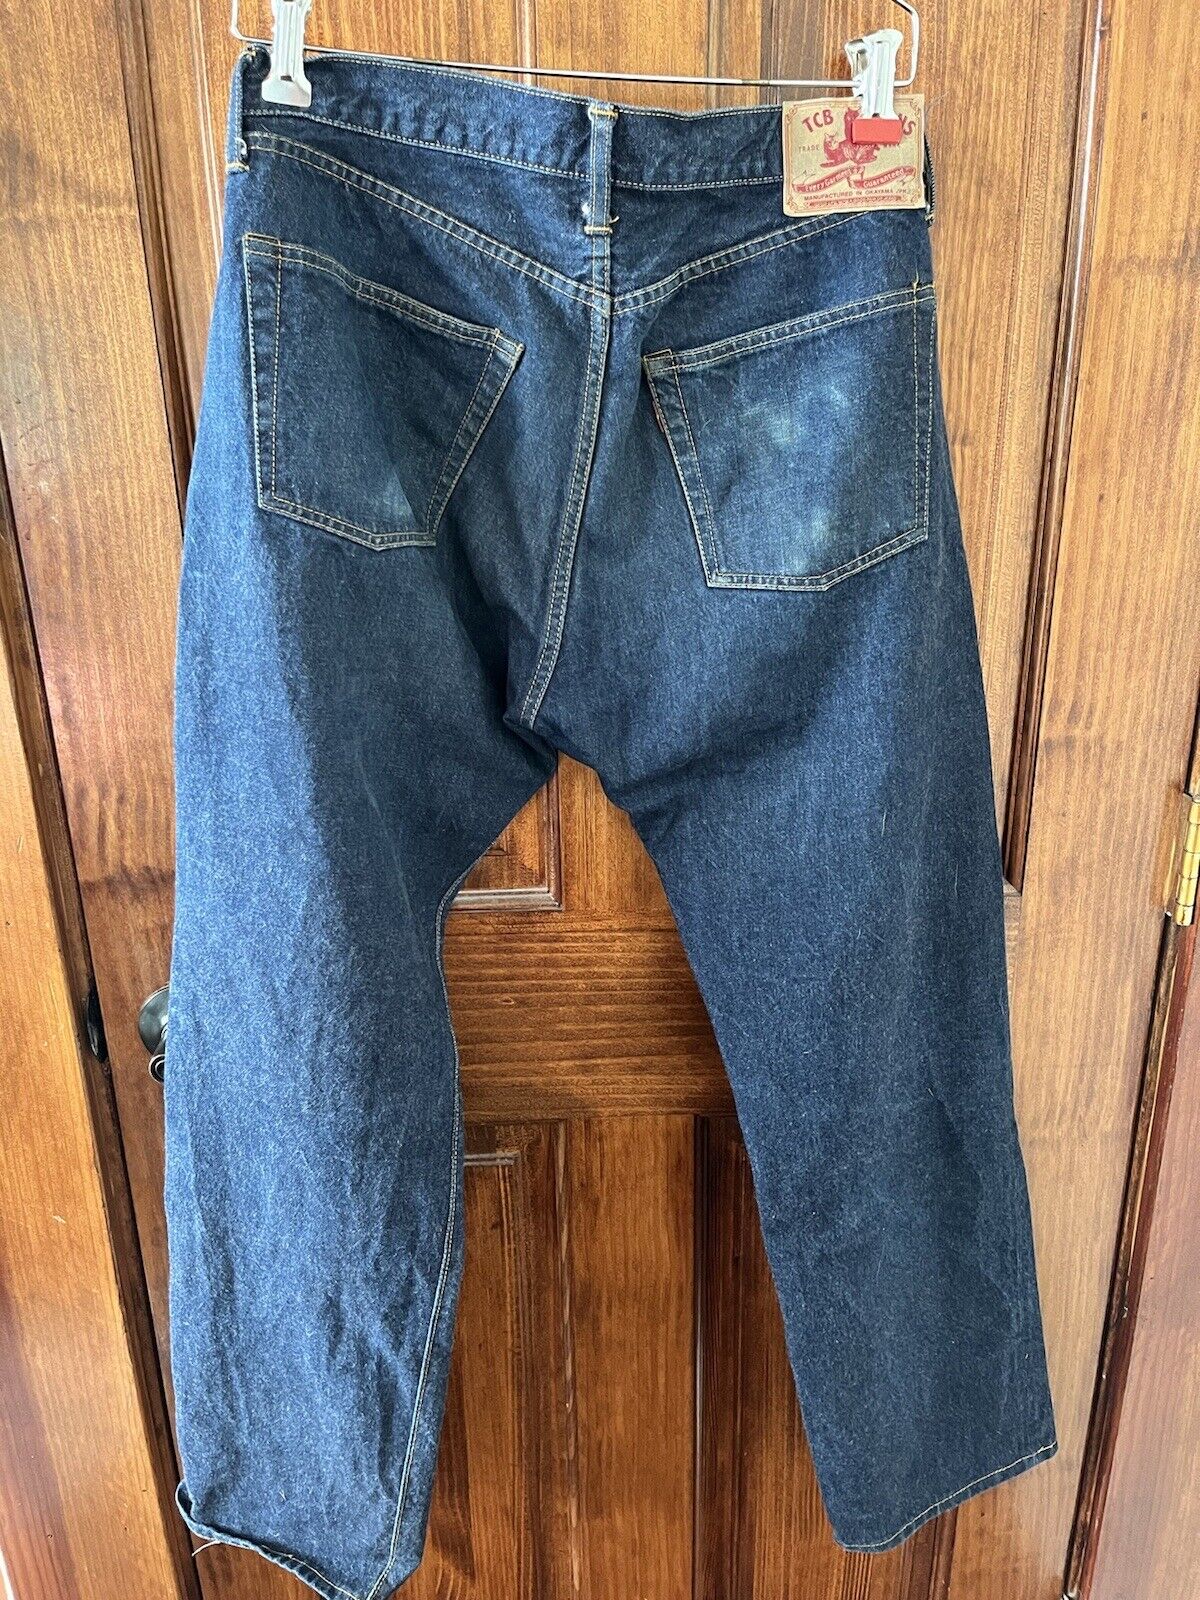 TCB Two Cats Brand S60 Jeans Size 32 Japanese Selvedge Levi’s Reproduction